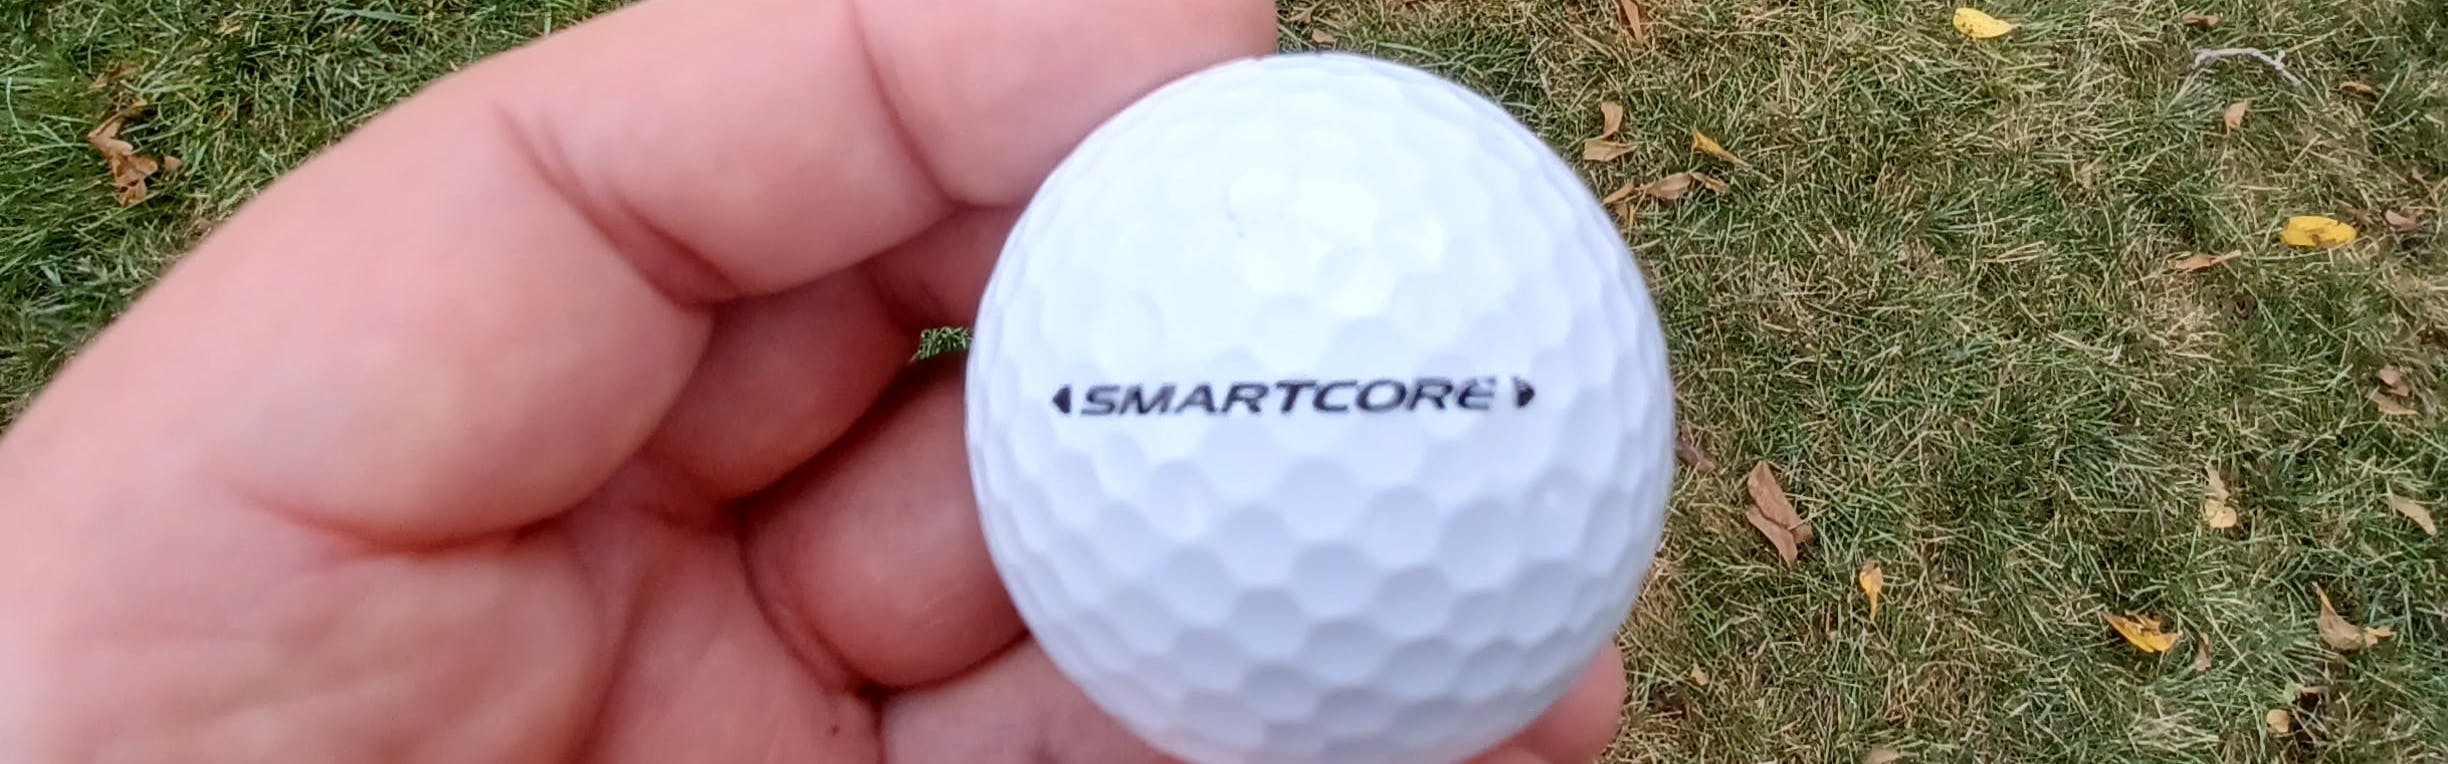 Wilson Smart Core after 18 holes.